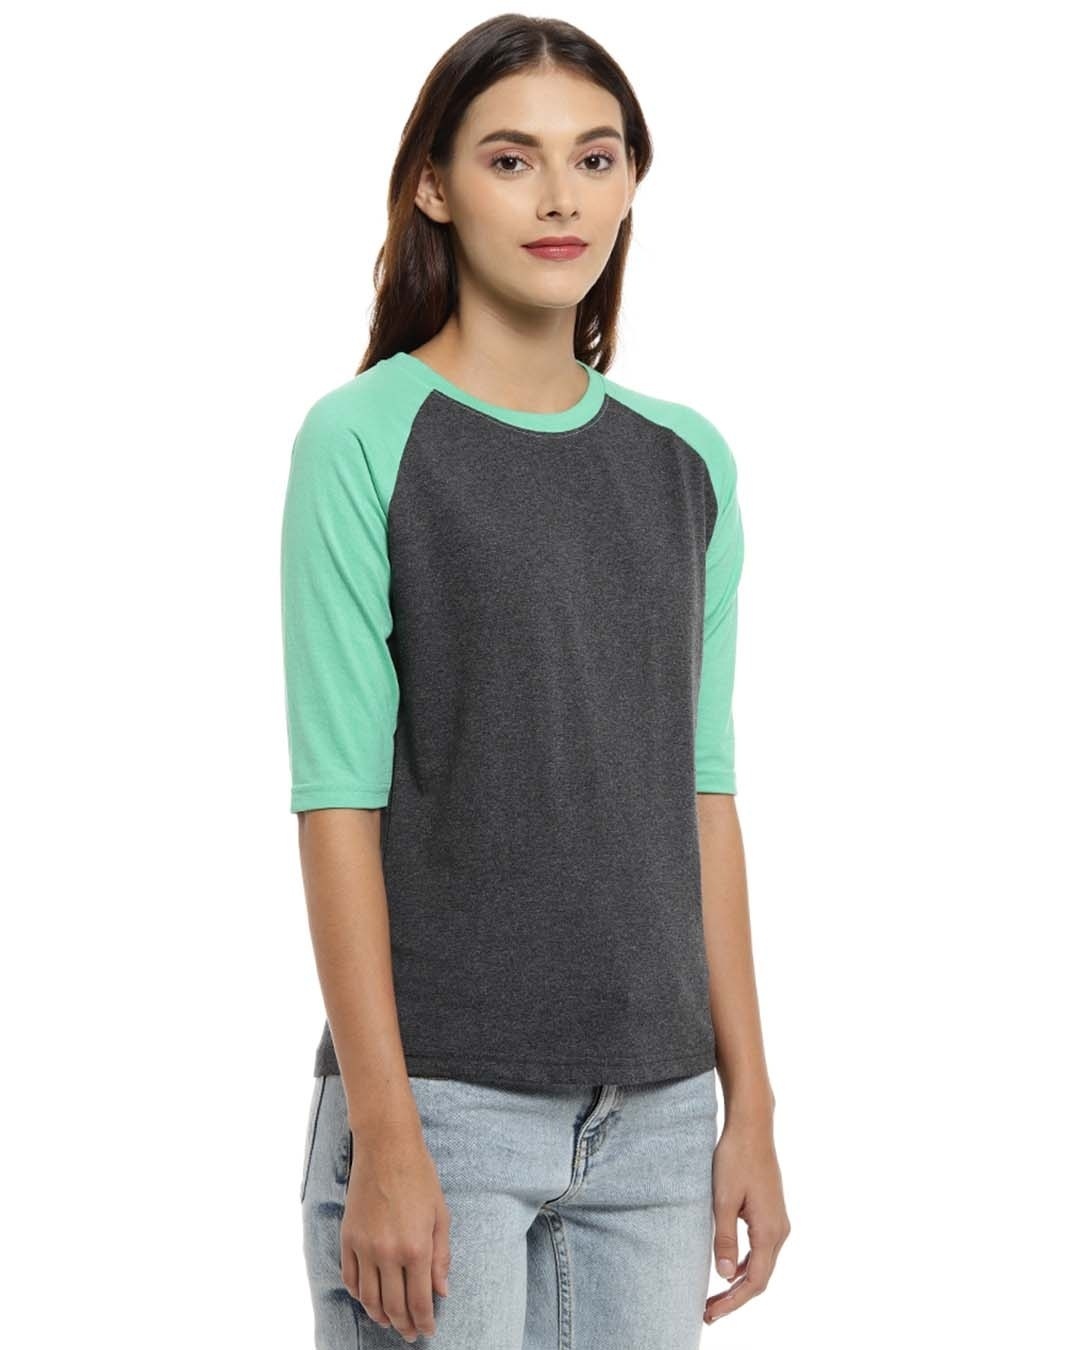 Shop Solid Women's Round Neck Charcoal Green  T-Shirt-Back